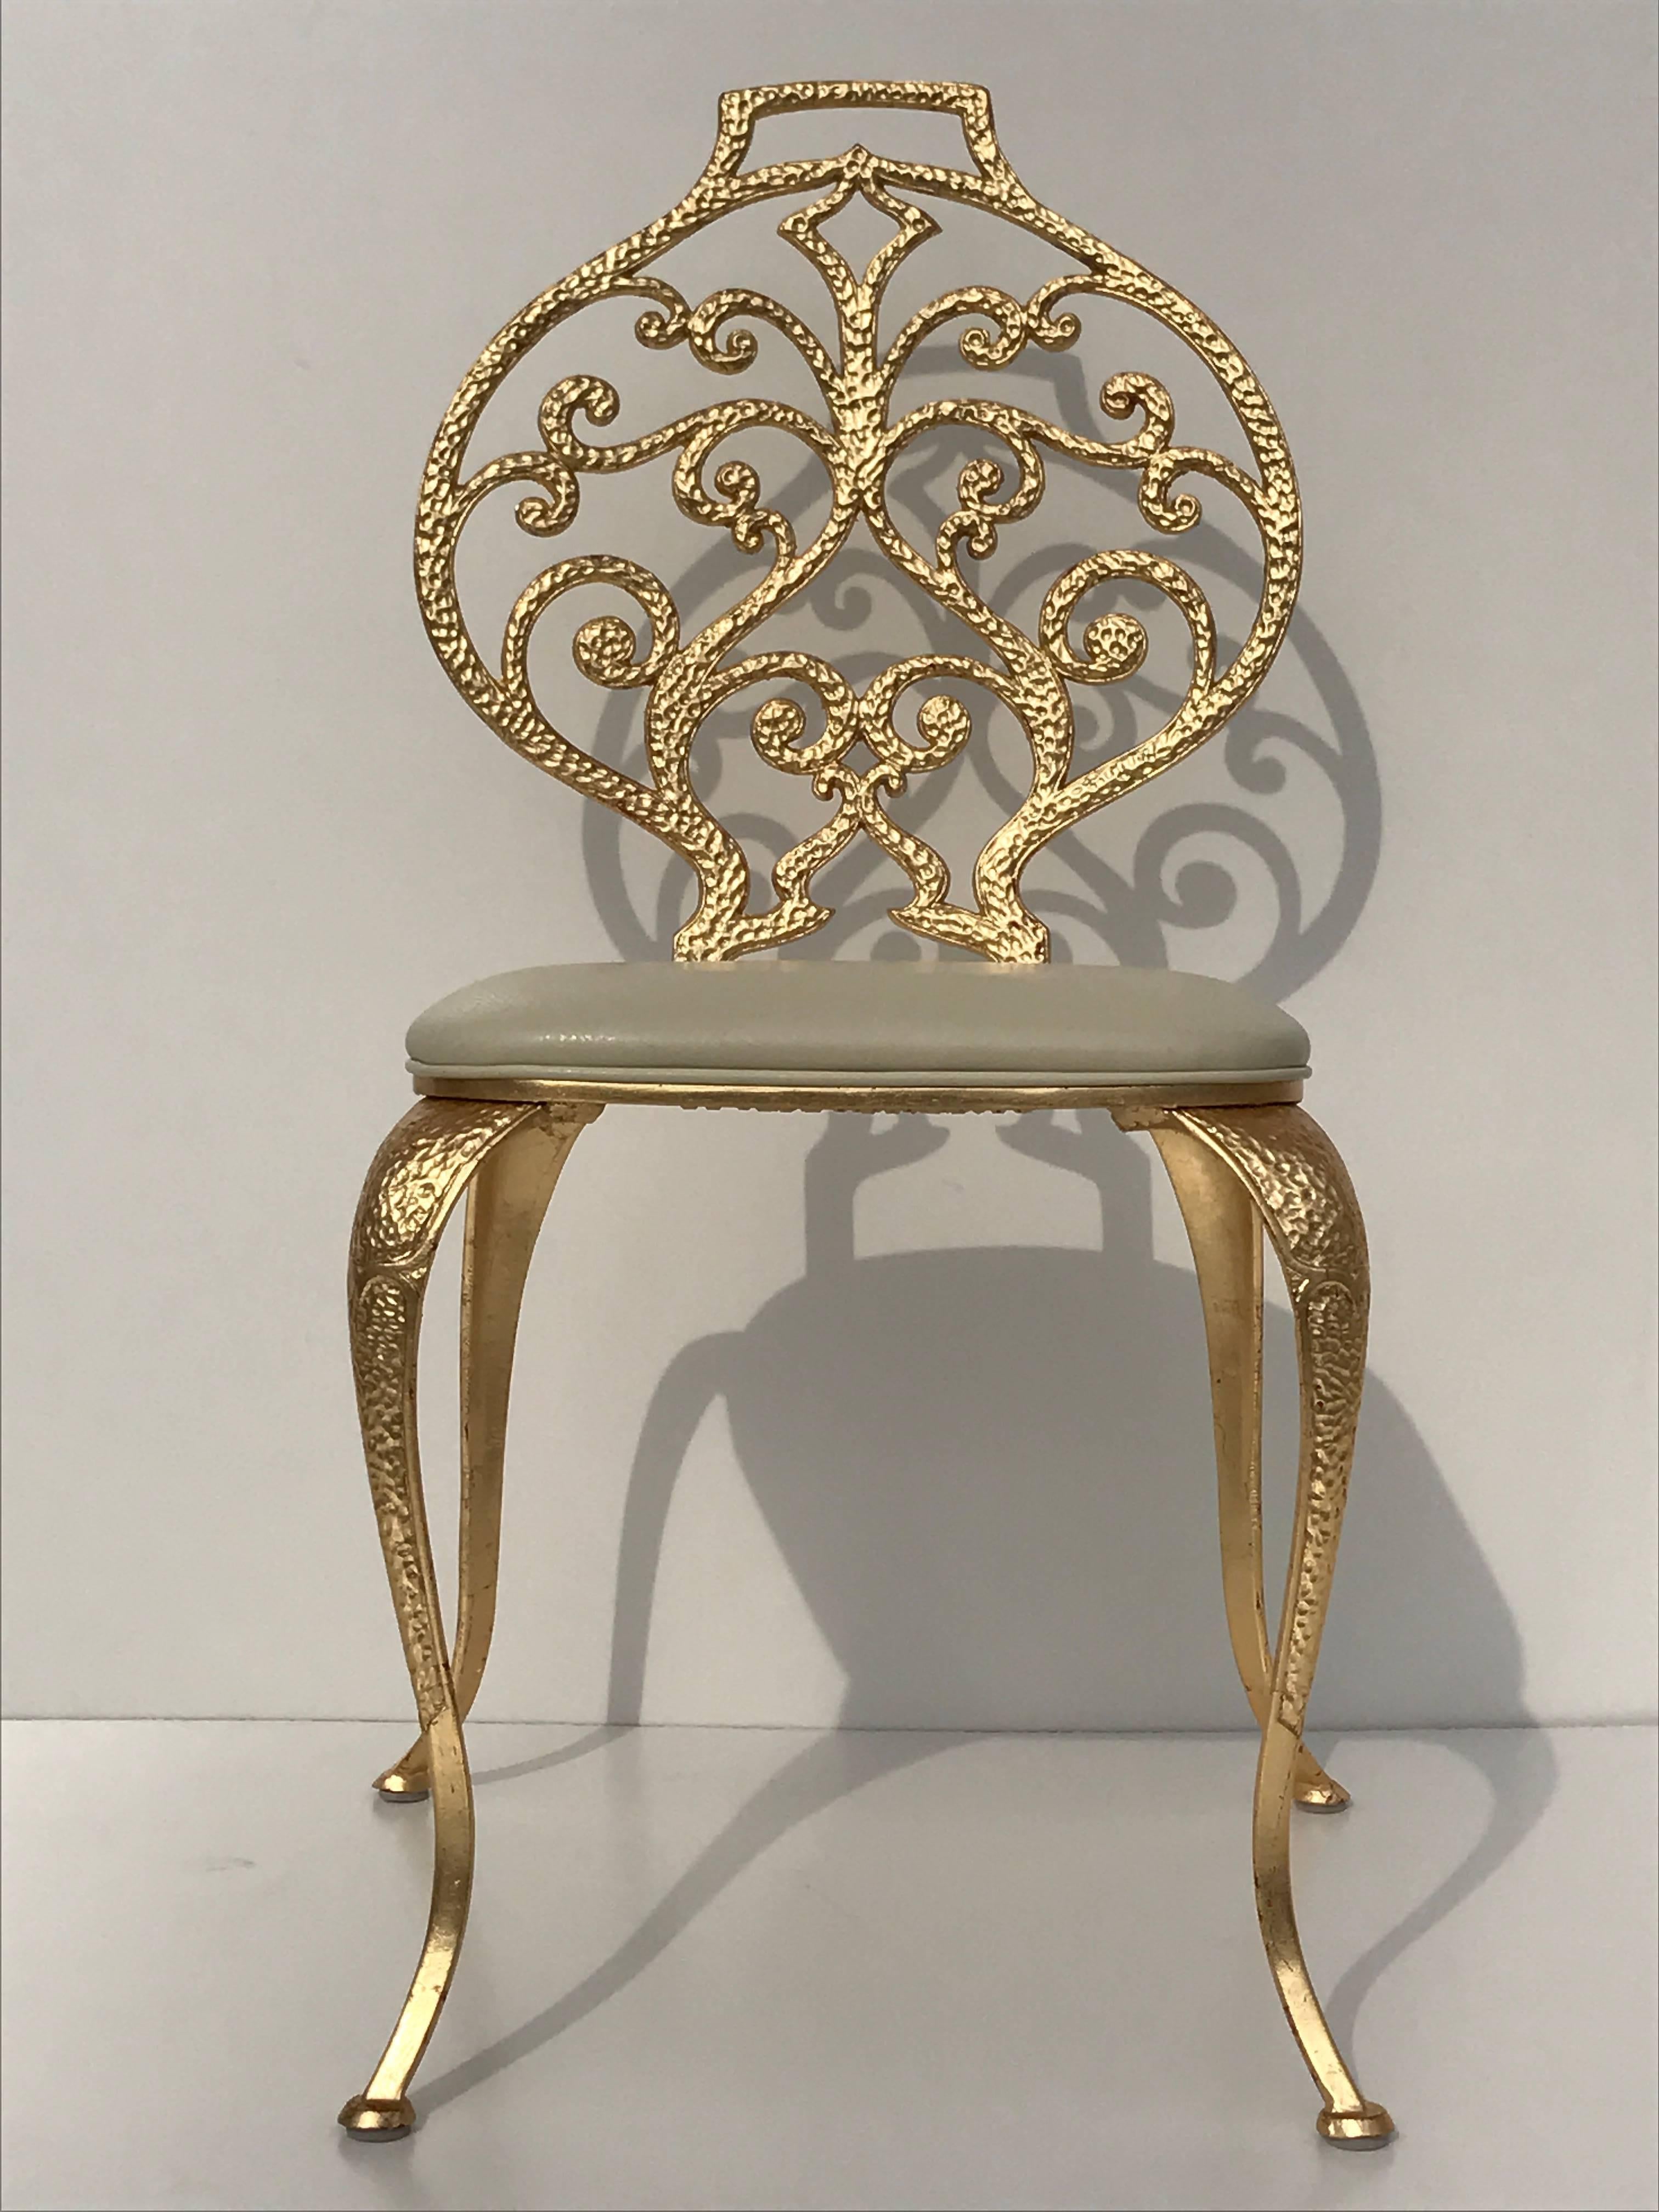 Gold leafed vanity or dining chairs by Thinline Mfg made of solid aluminum.
Can be used indoors or outdoors. 
Also can be used with or without seat. Priced individually. Two available.